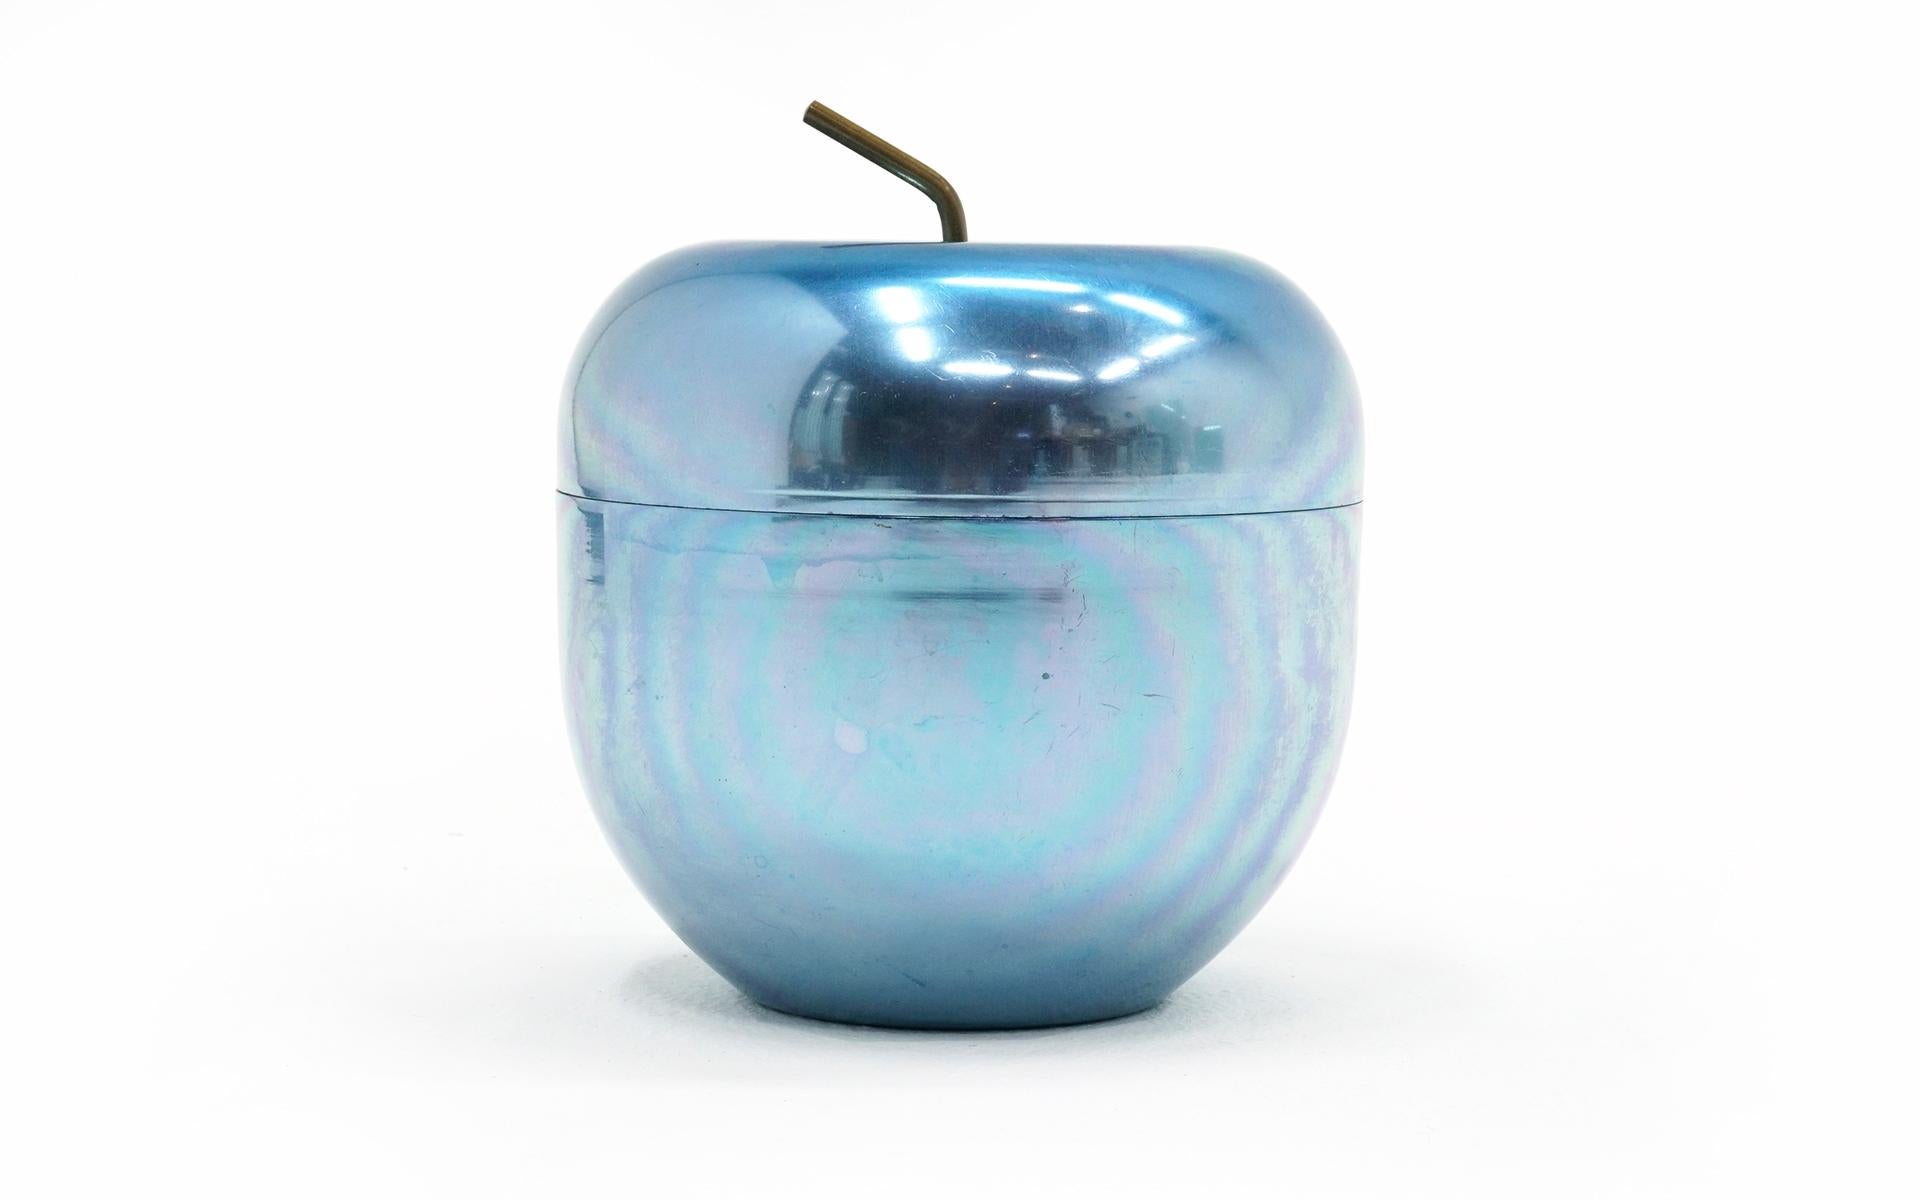 Rare apple shaped blue anodized aluminum ice bucket with brass stem designed by Ettore Sottsass, 1950s. Light scratches to the exterior, but no dents or significant scratches. More wear on the inside bottom and underside of the container. Overall